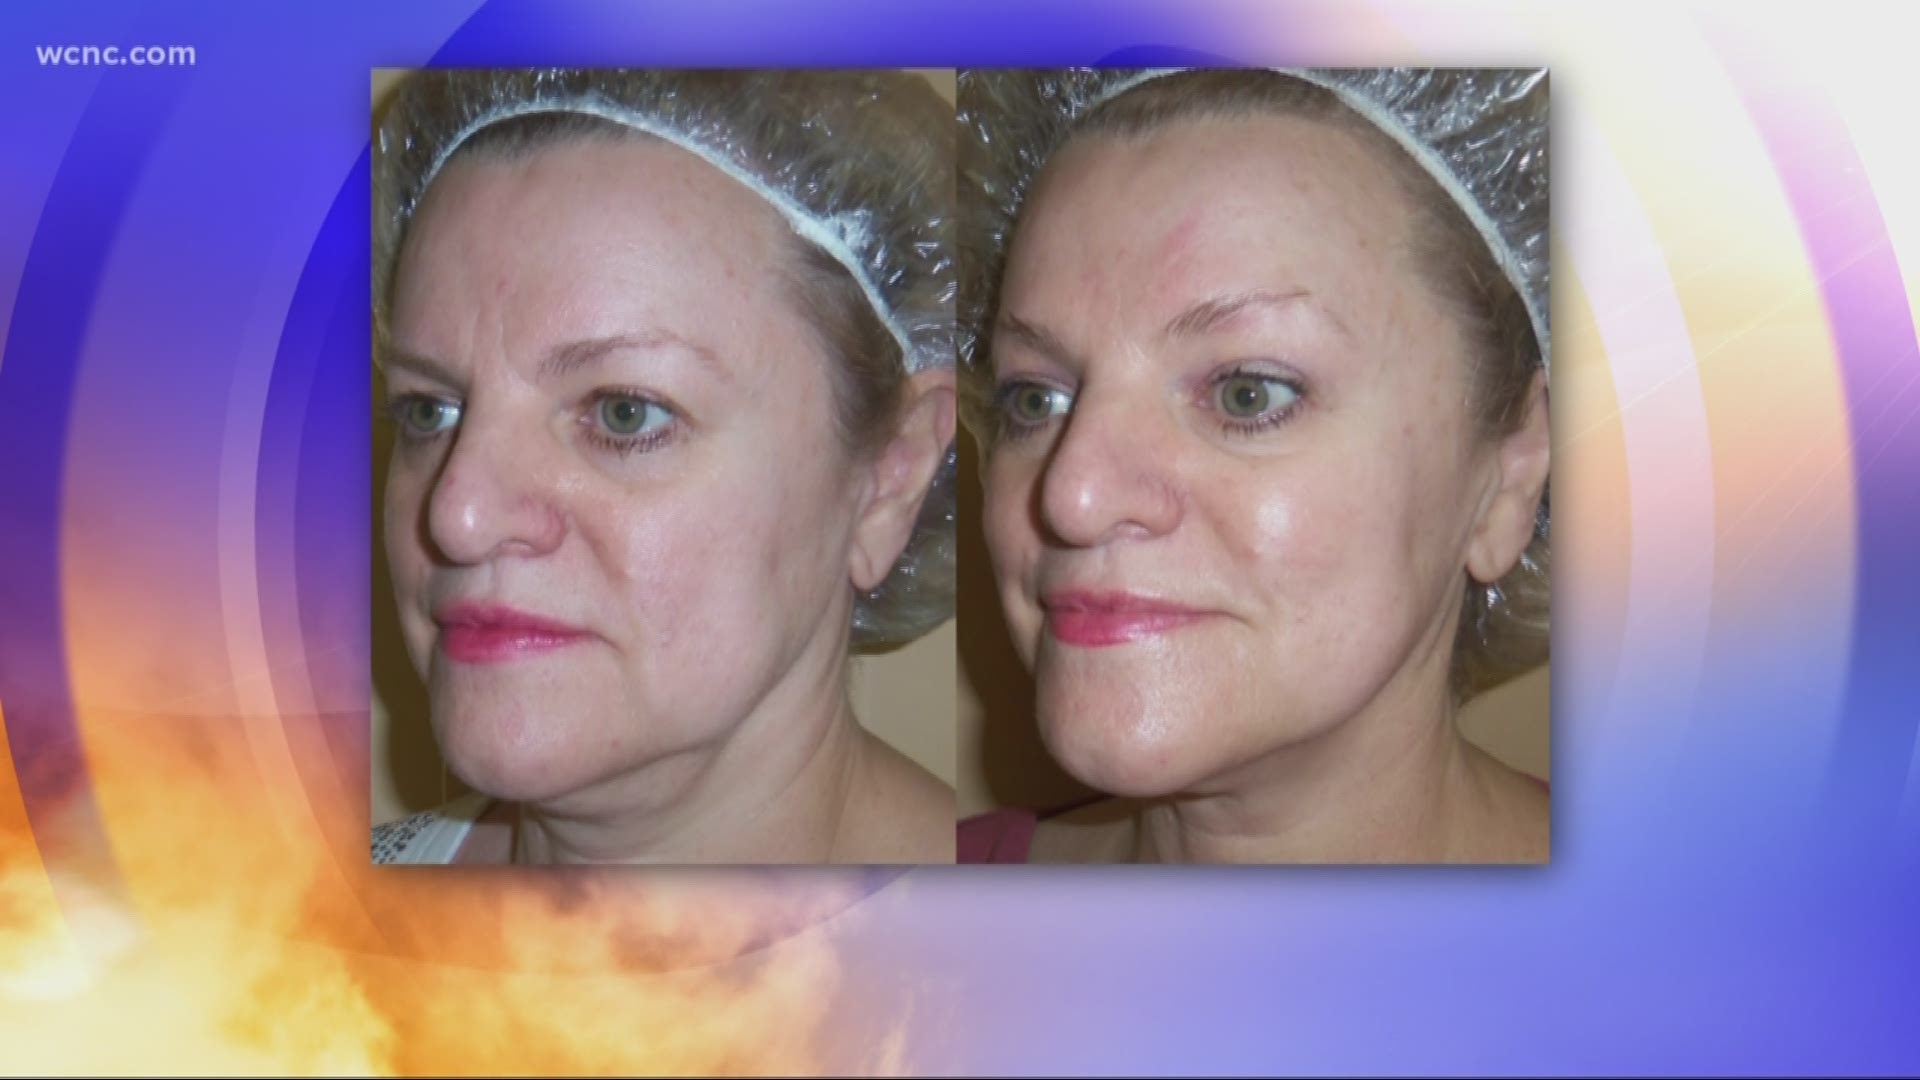 Beautiful Image Anti-Aging specializes in this procedure that turns back the hands of time